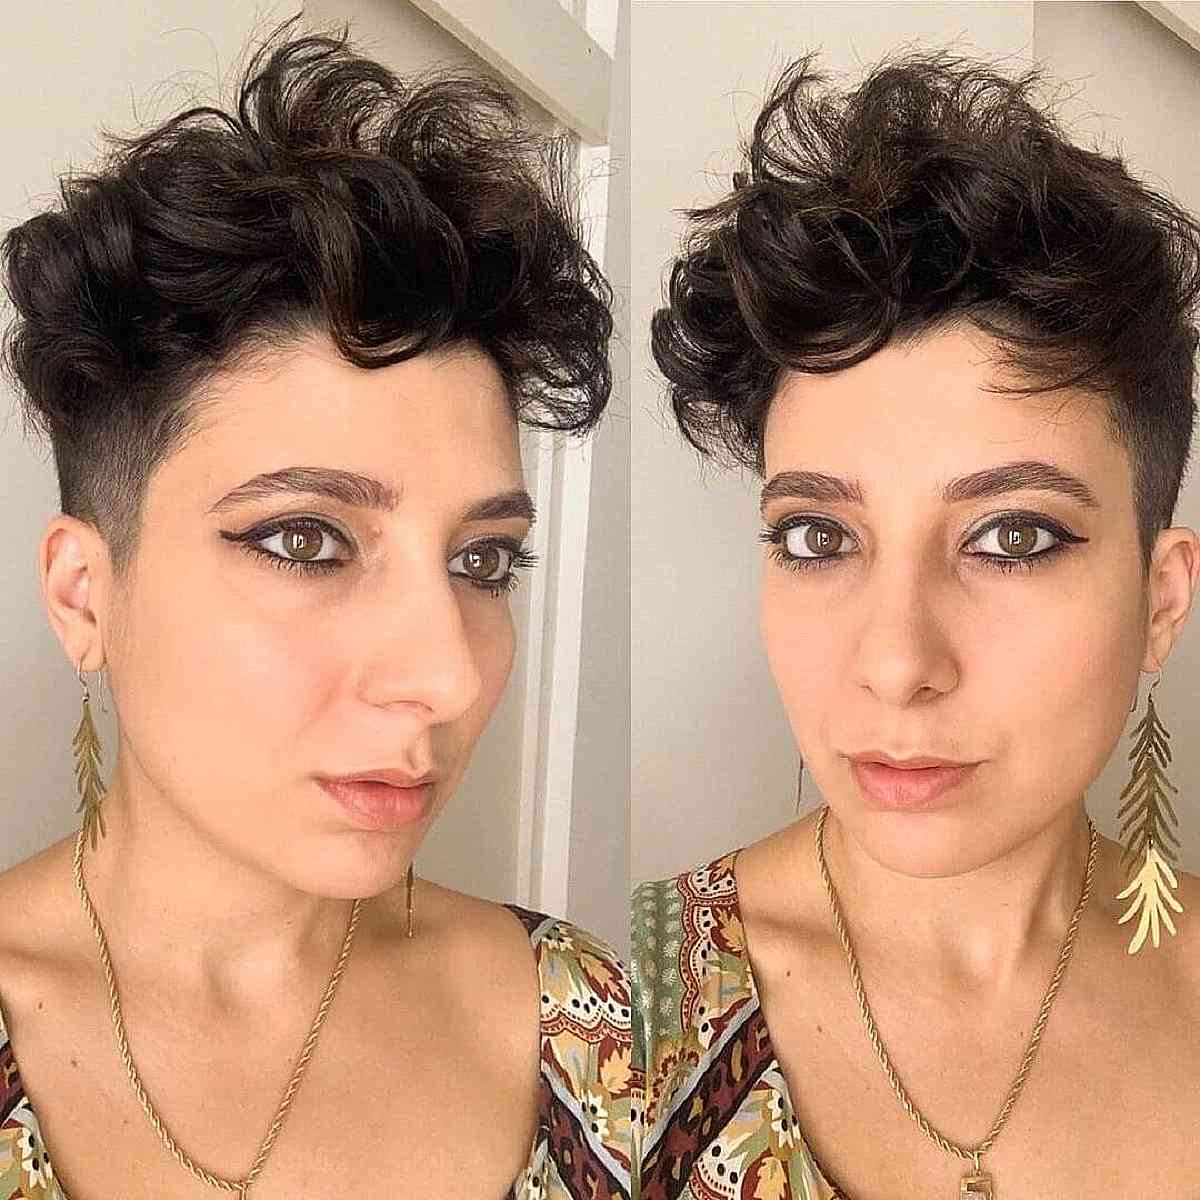 Short and Edgy Cut for Curly Hair